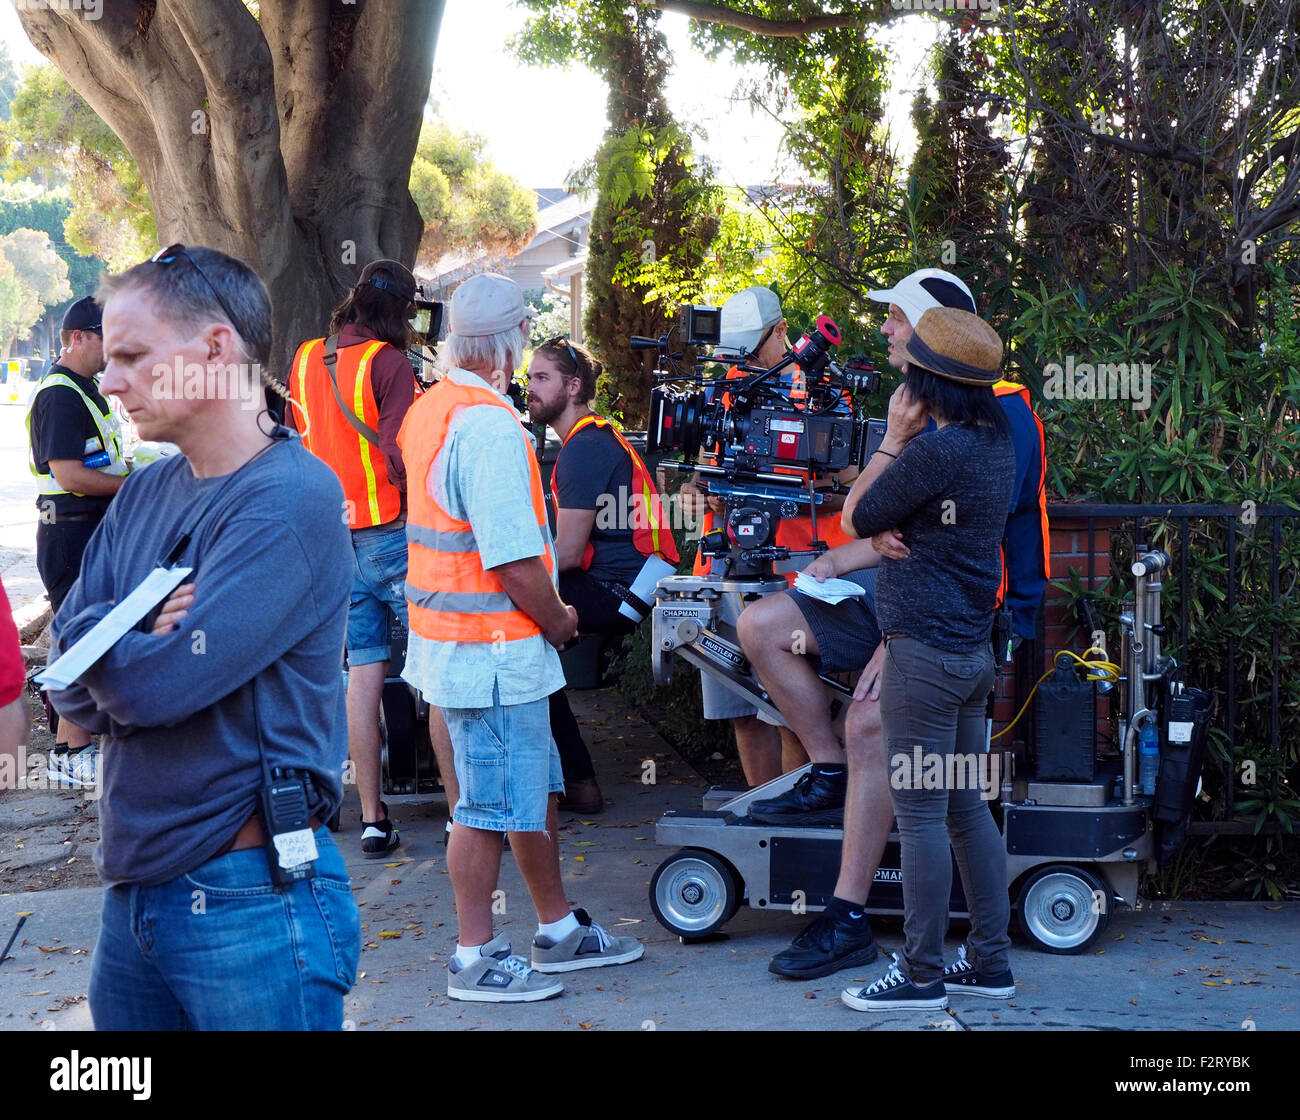 Movie Making Crew and Gear on Location Stock Photo